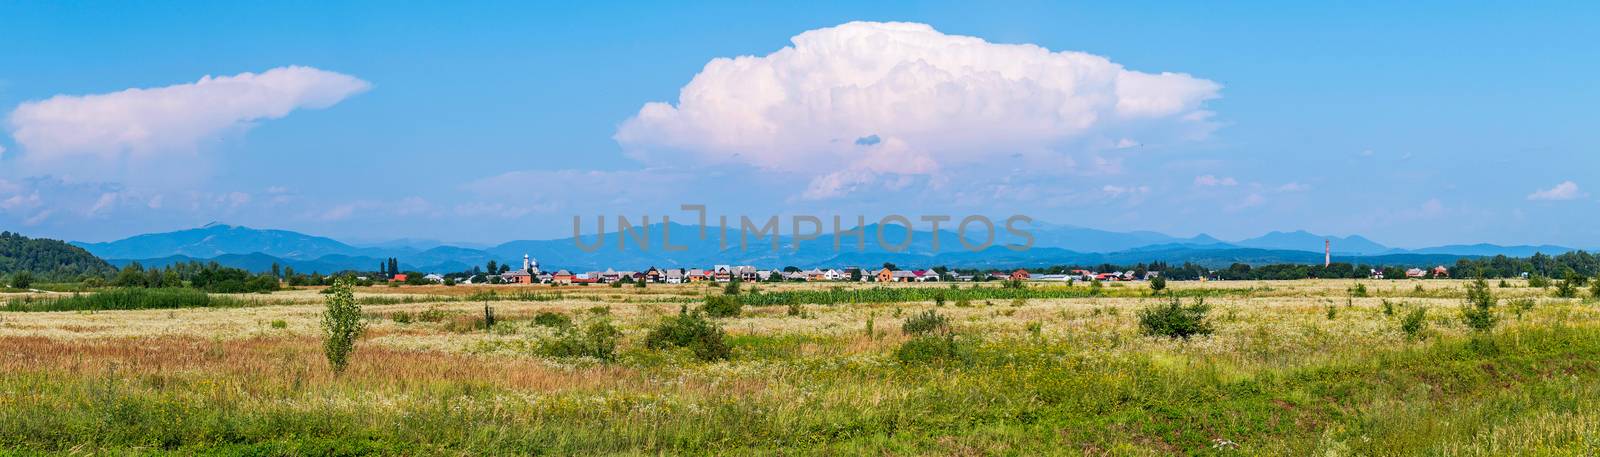 A huge white cloud against the blue sky settled over a small rural mountain village